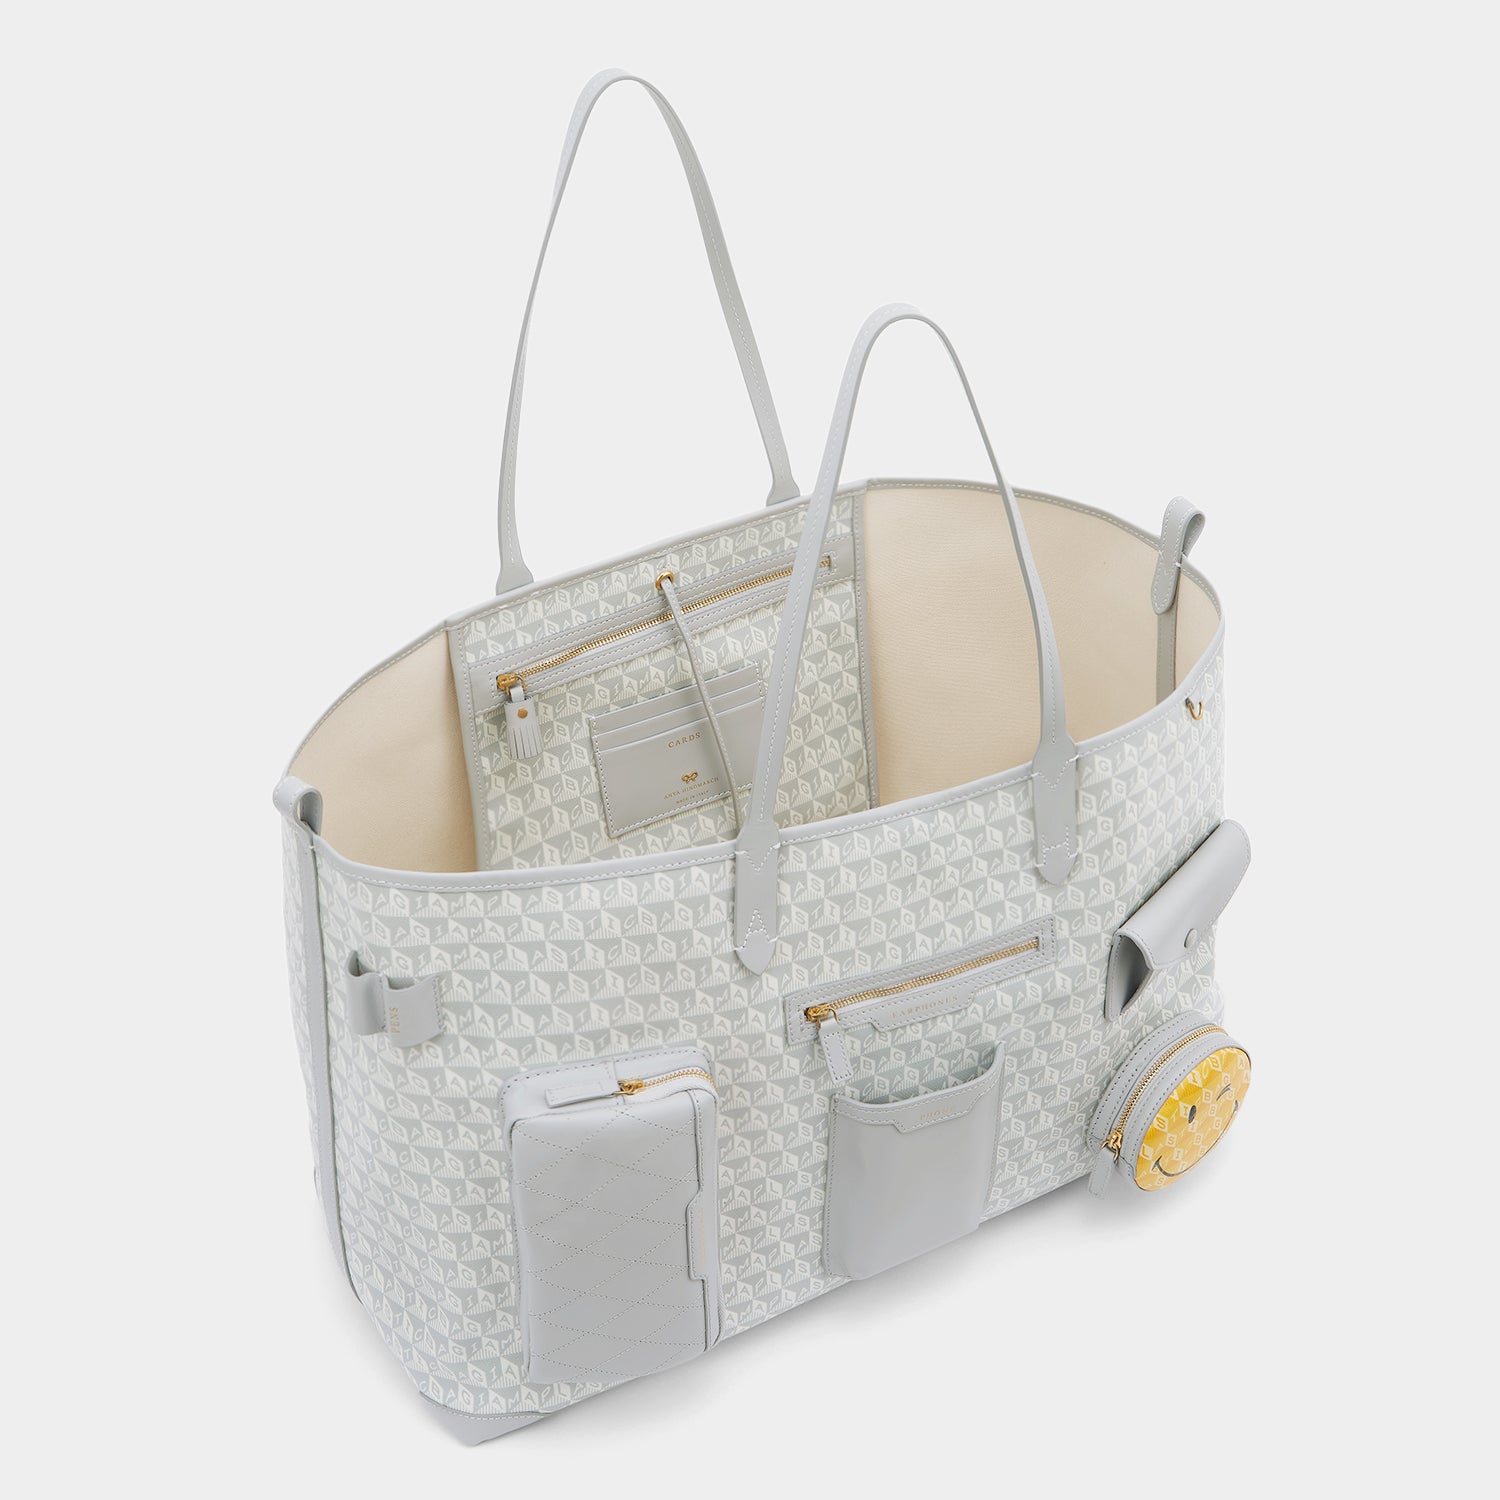 I am a Plastic Bag XL Wink Tote -

                  
                    Recycled Canvas in Frost -
                  

                  Anya Hindmarch EU
